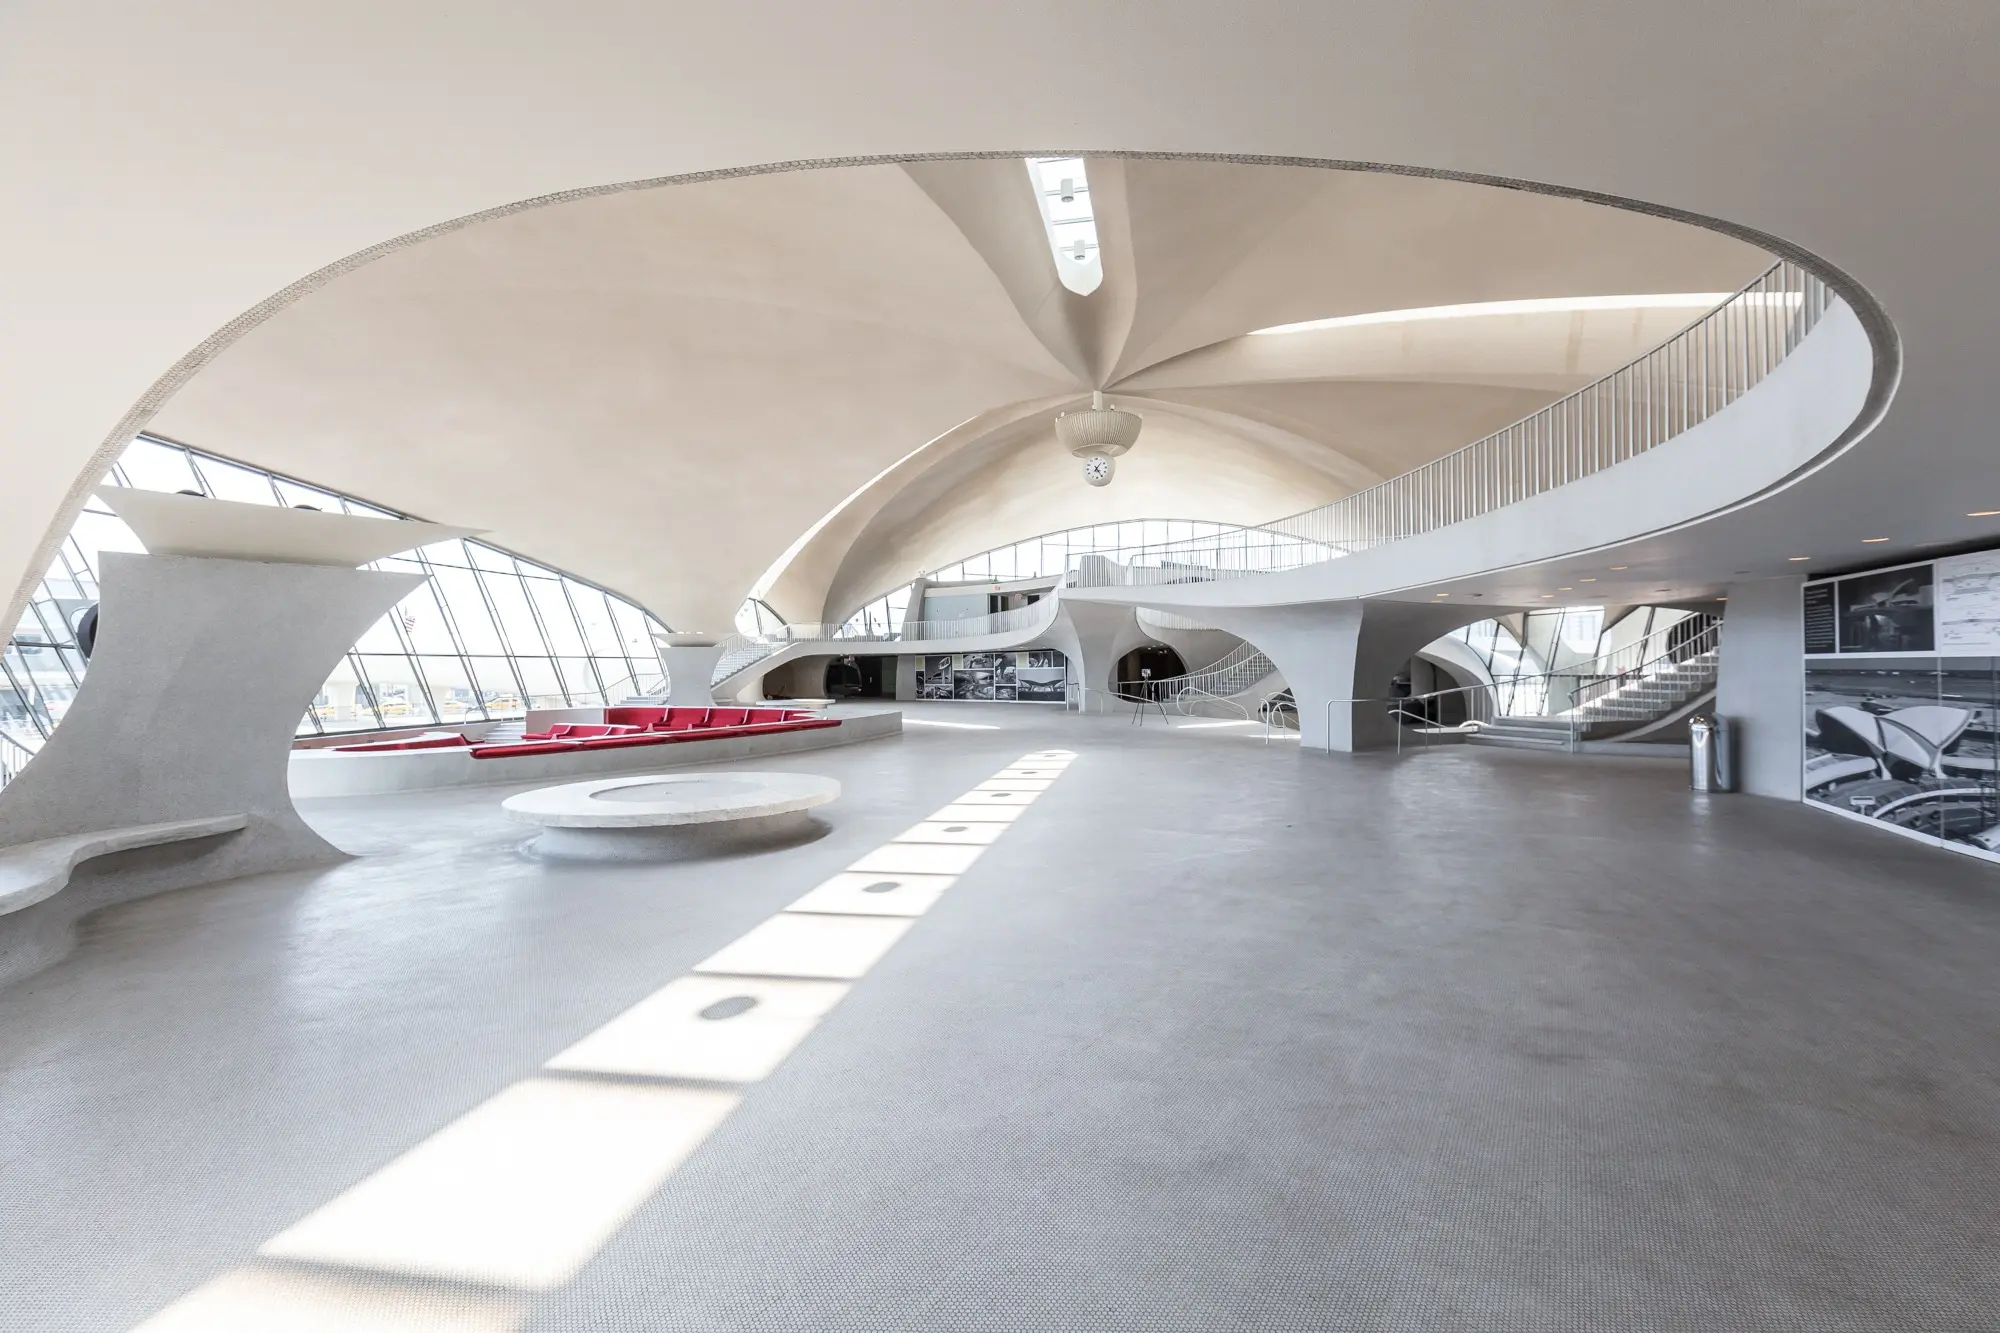 JFK's TWA Flight Center Hotel tops out, on track to open in 2019 with ...